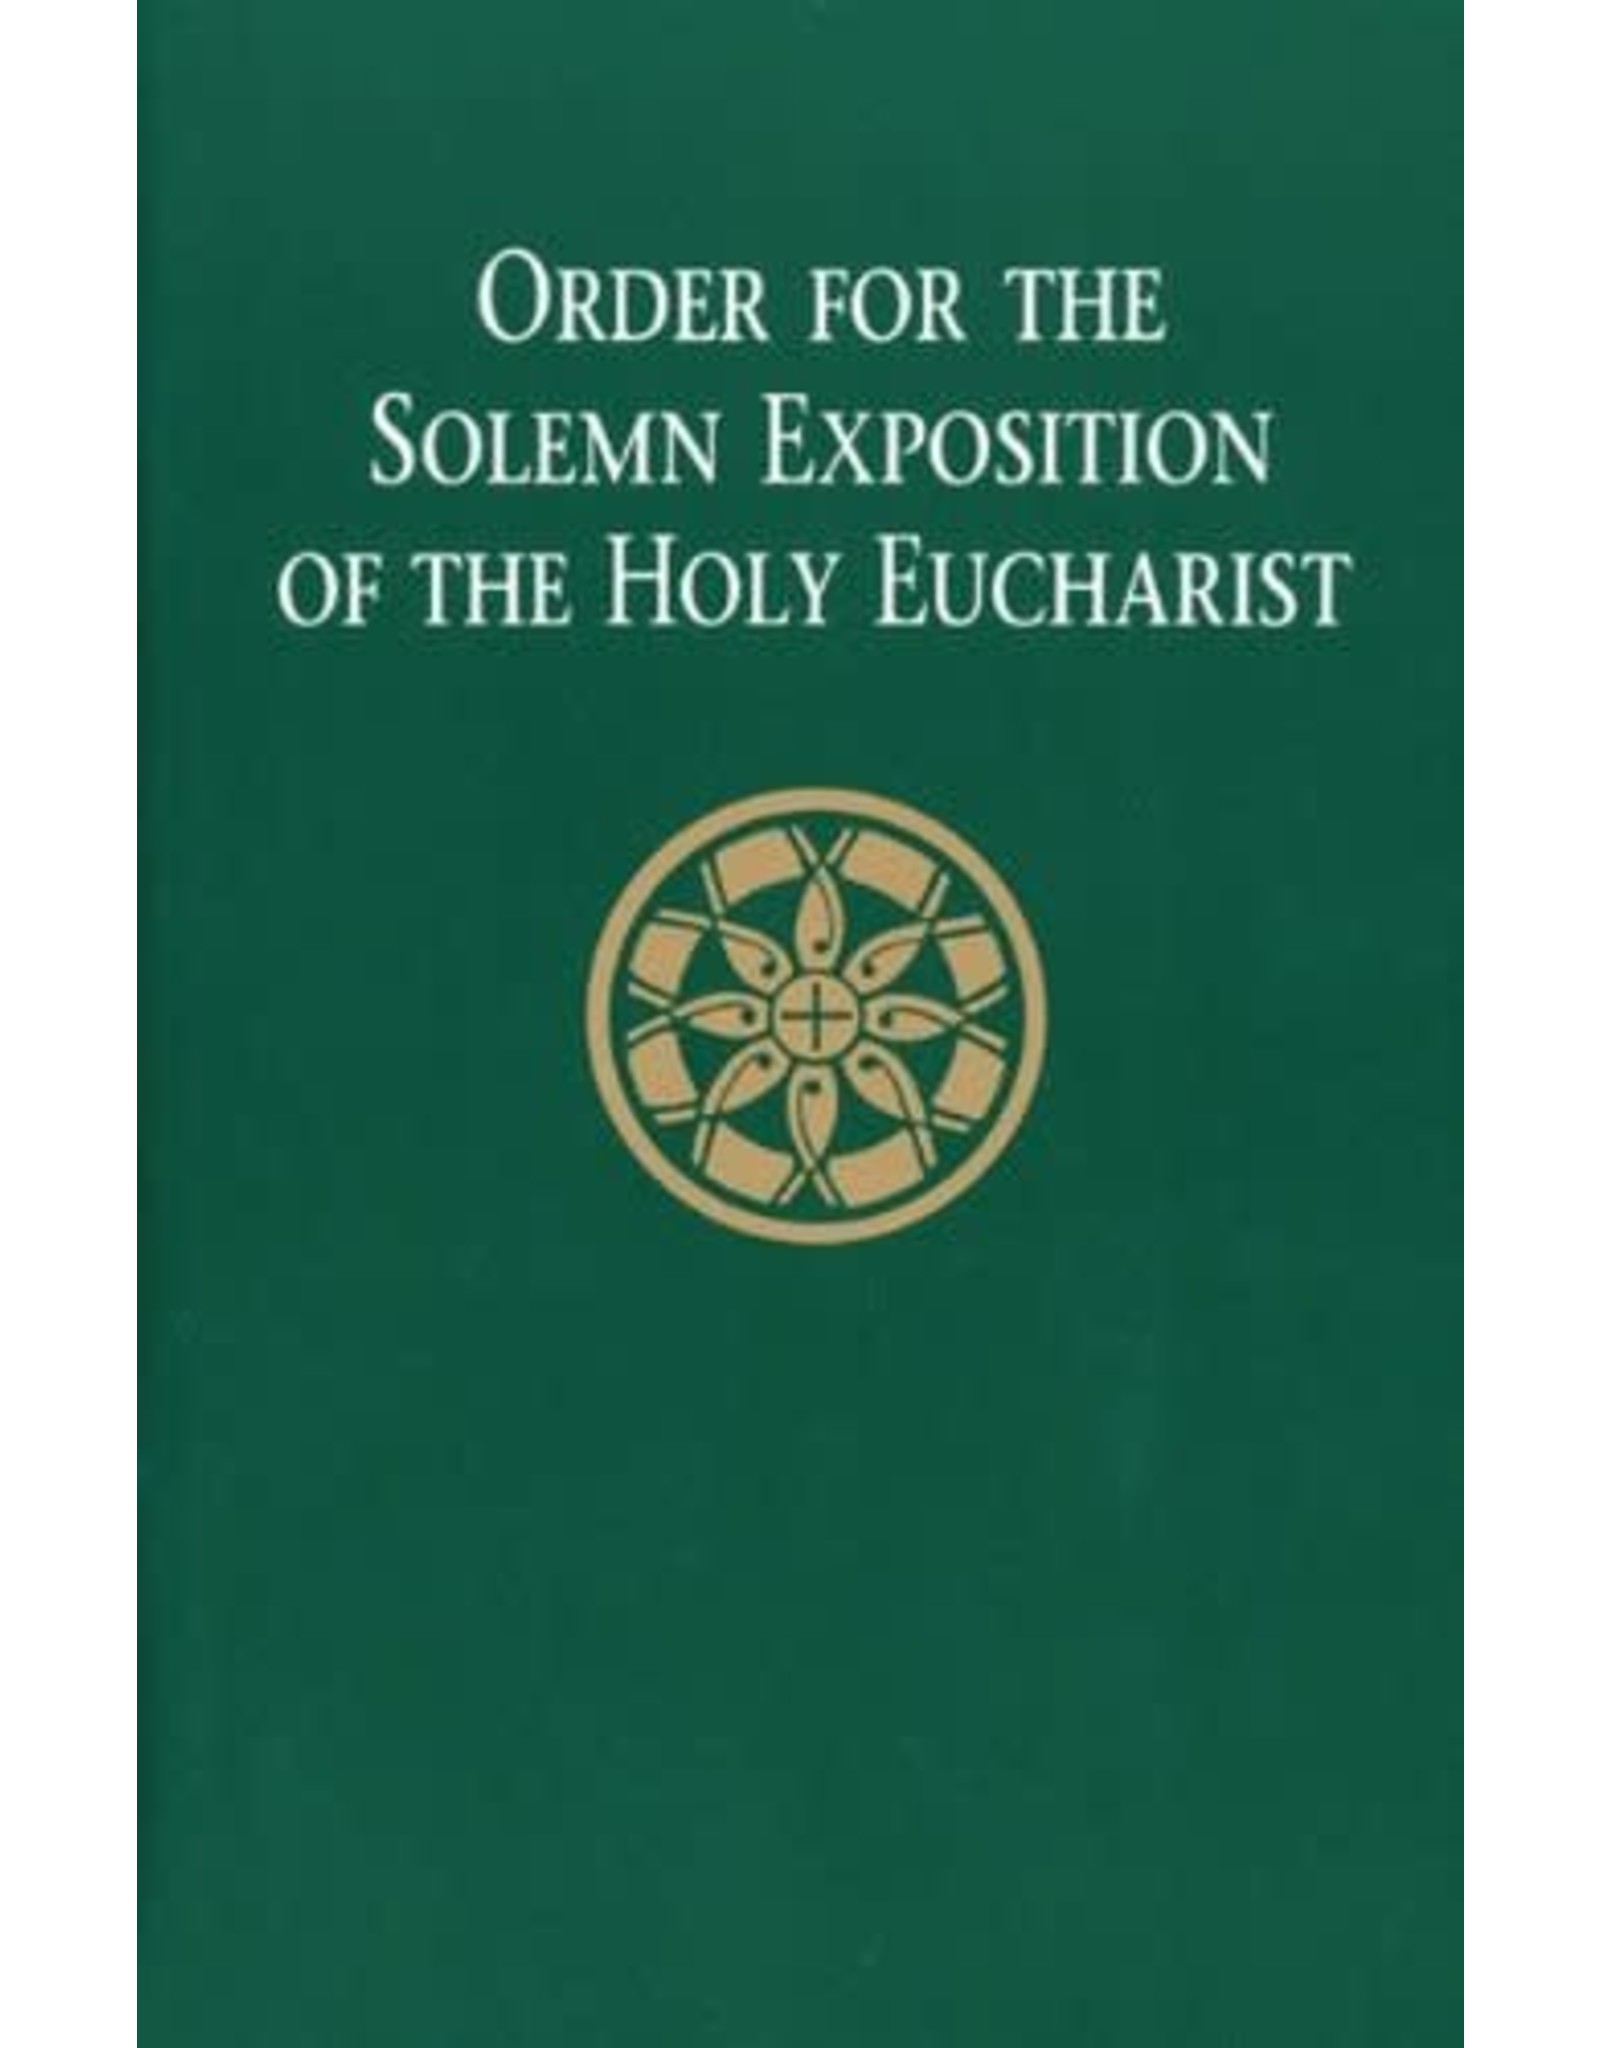 Liturgical Press Order for the Solemn Exposition of the Holy Eucharist